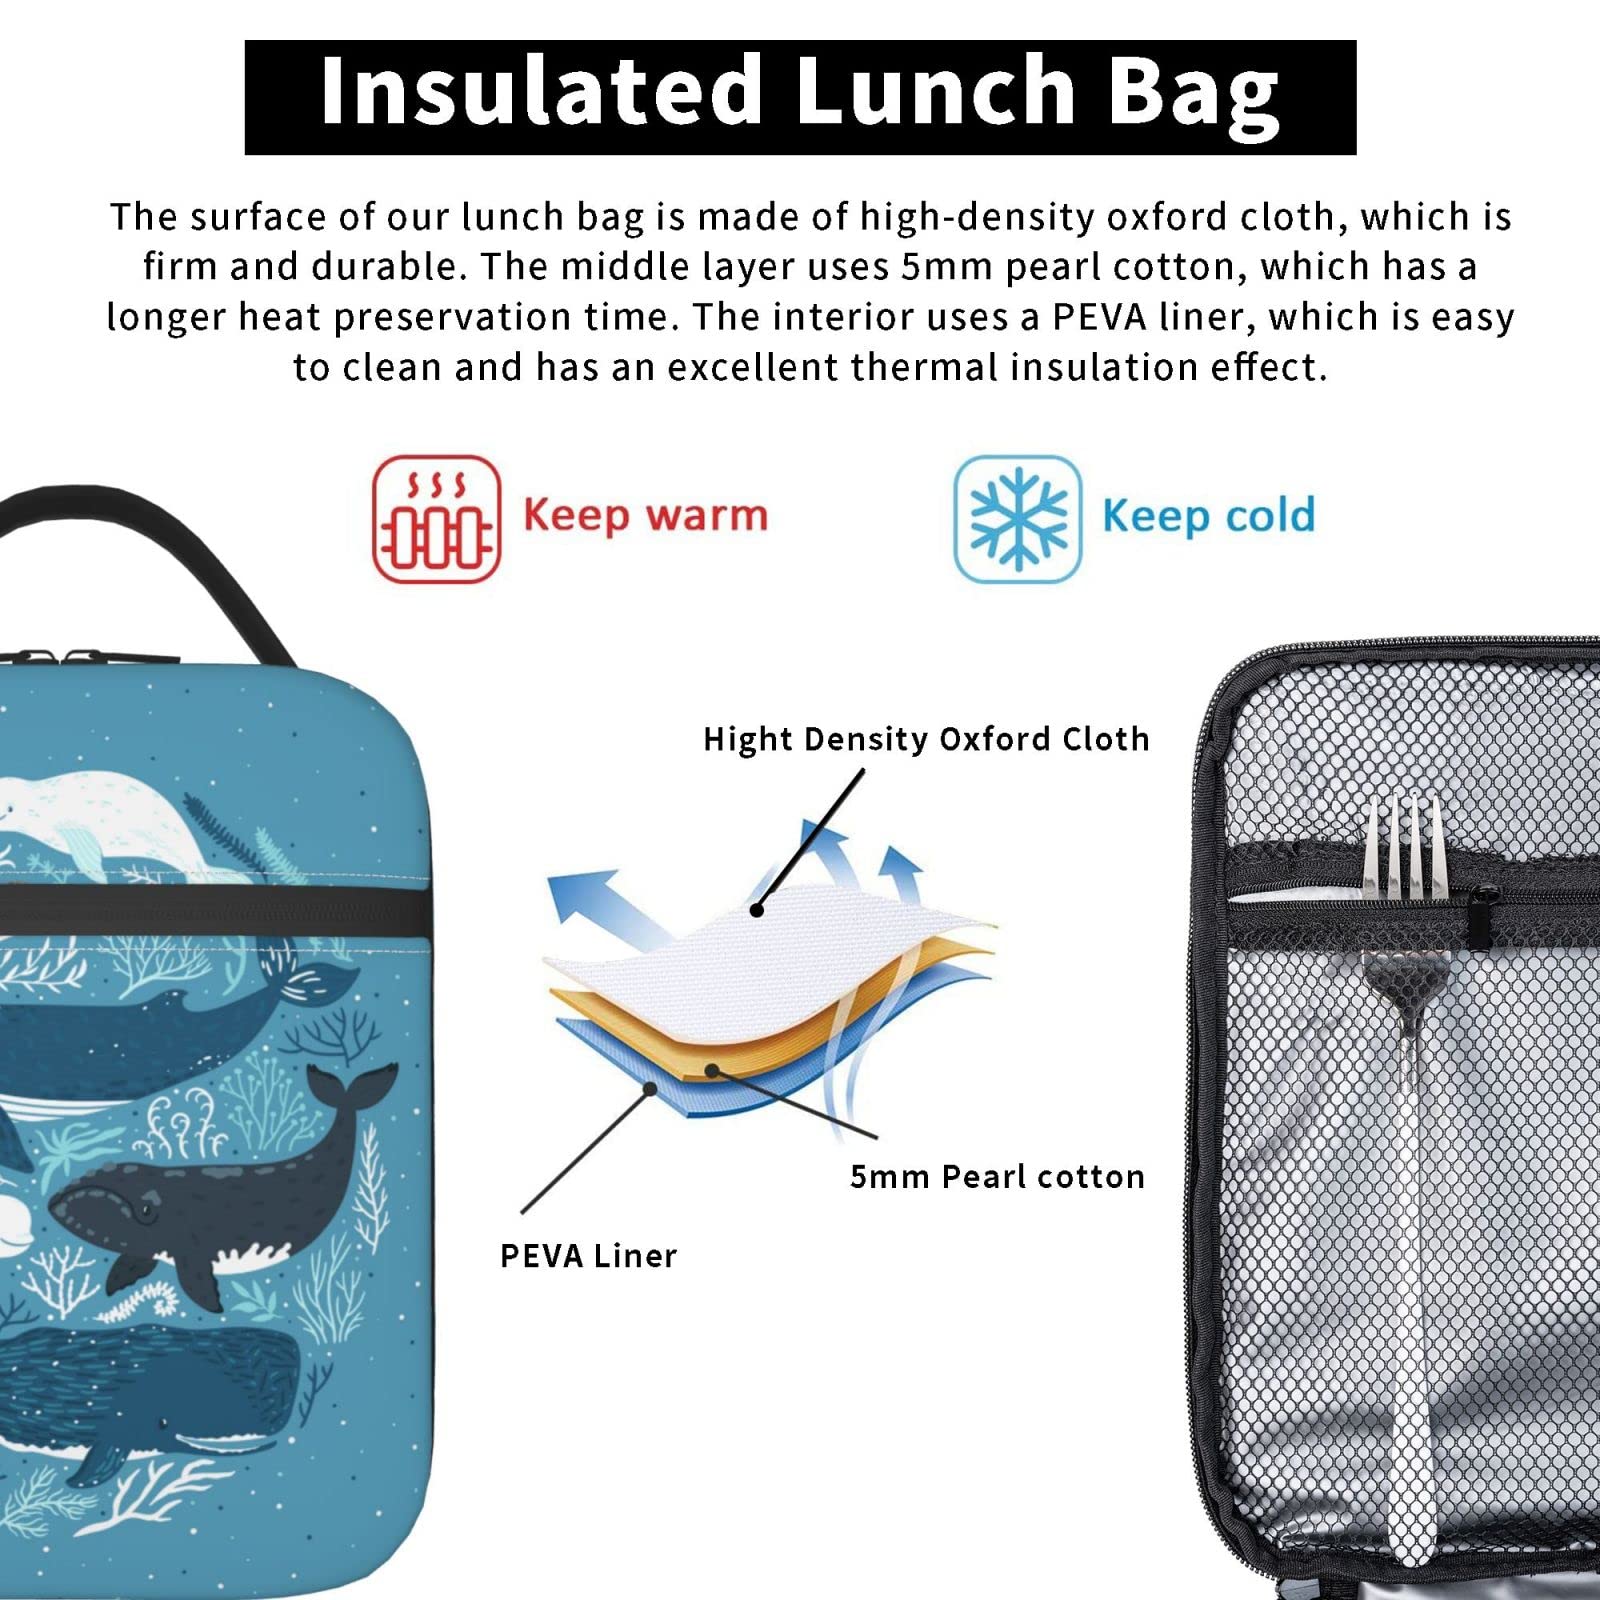 Echoserein Ocean Whale Sea Animals Lunch Bag Insulated Lunch Box Reusable Lunchbox Waterproof Portable Lunch Tote For Men Boys